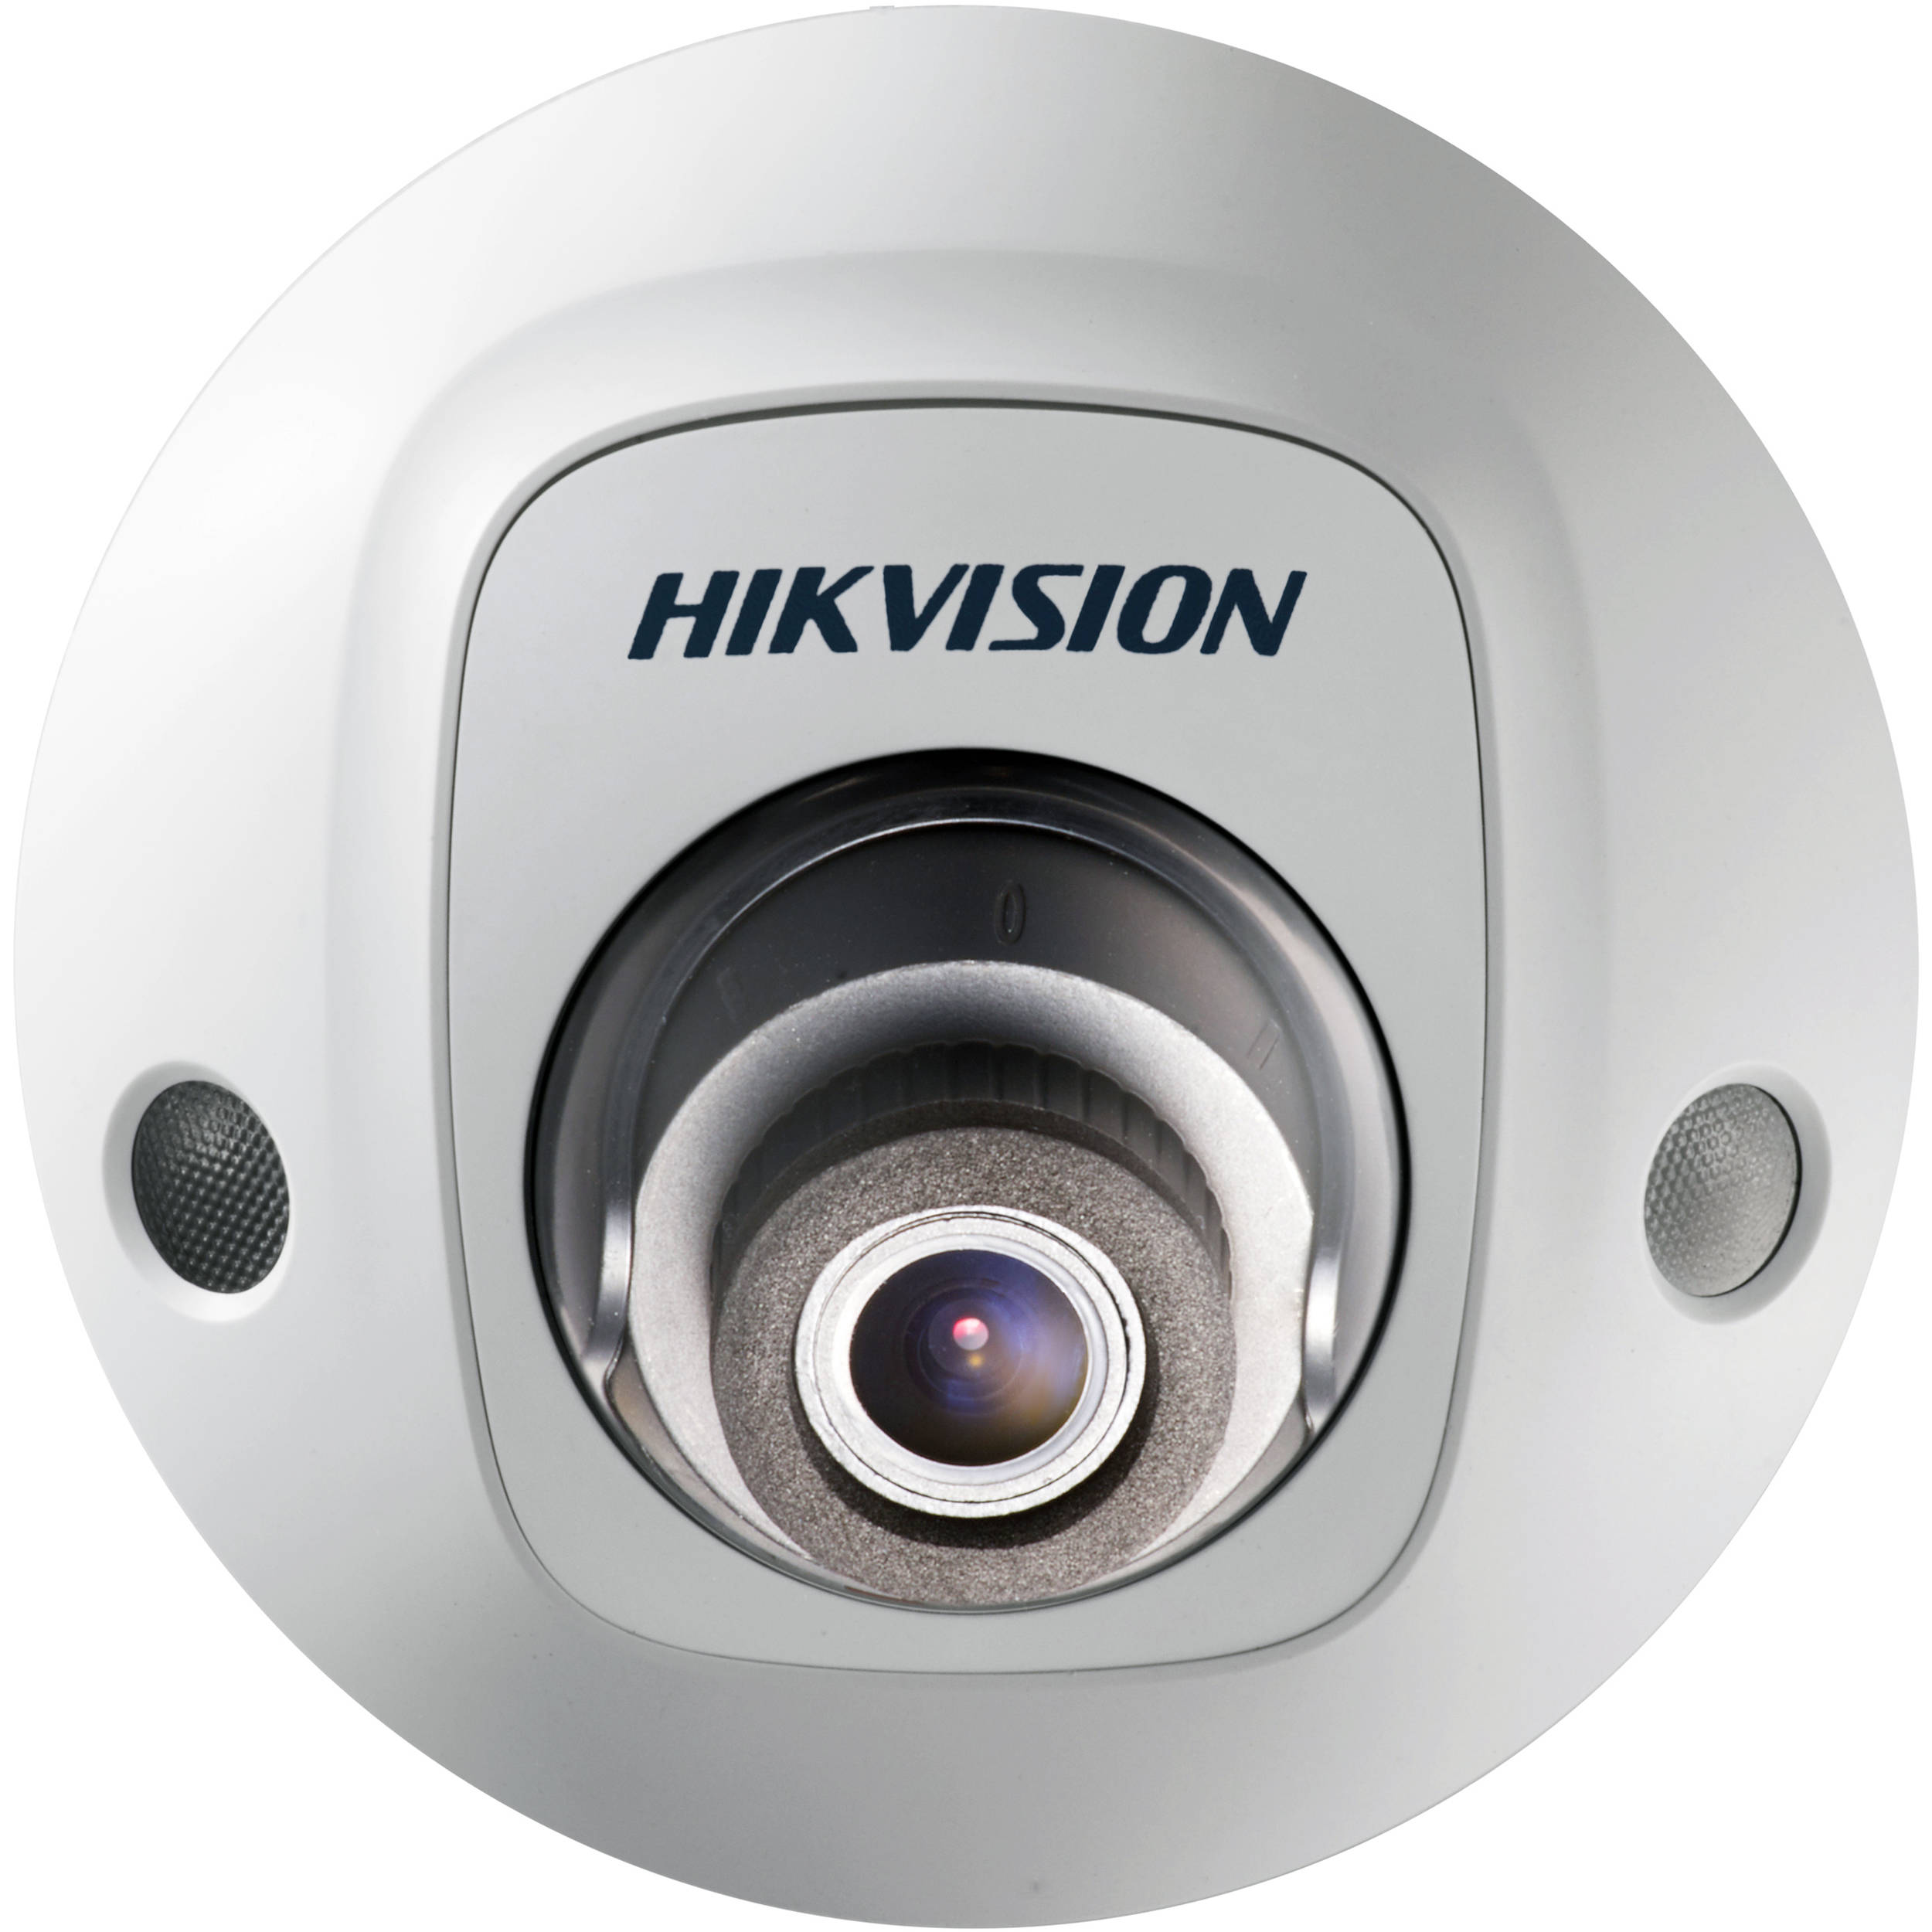 HIKVISION | COMPACT DOME 5 MP
2.8MM NIGHT/DAY IR